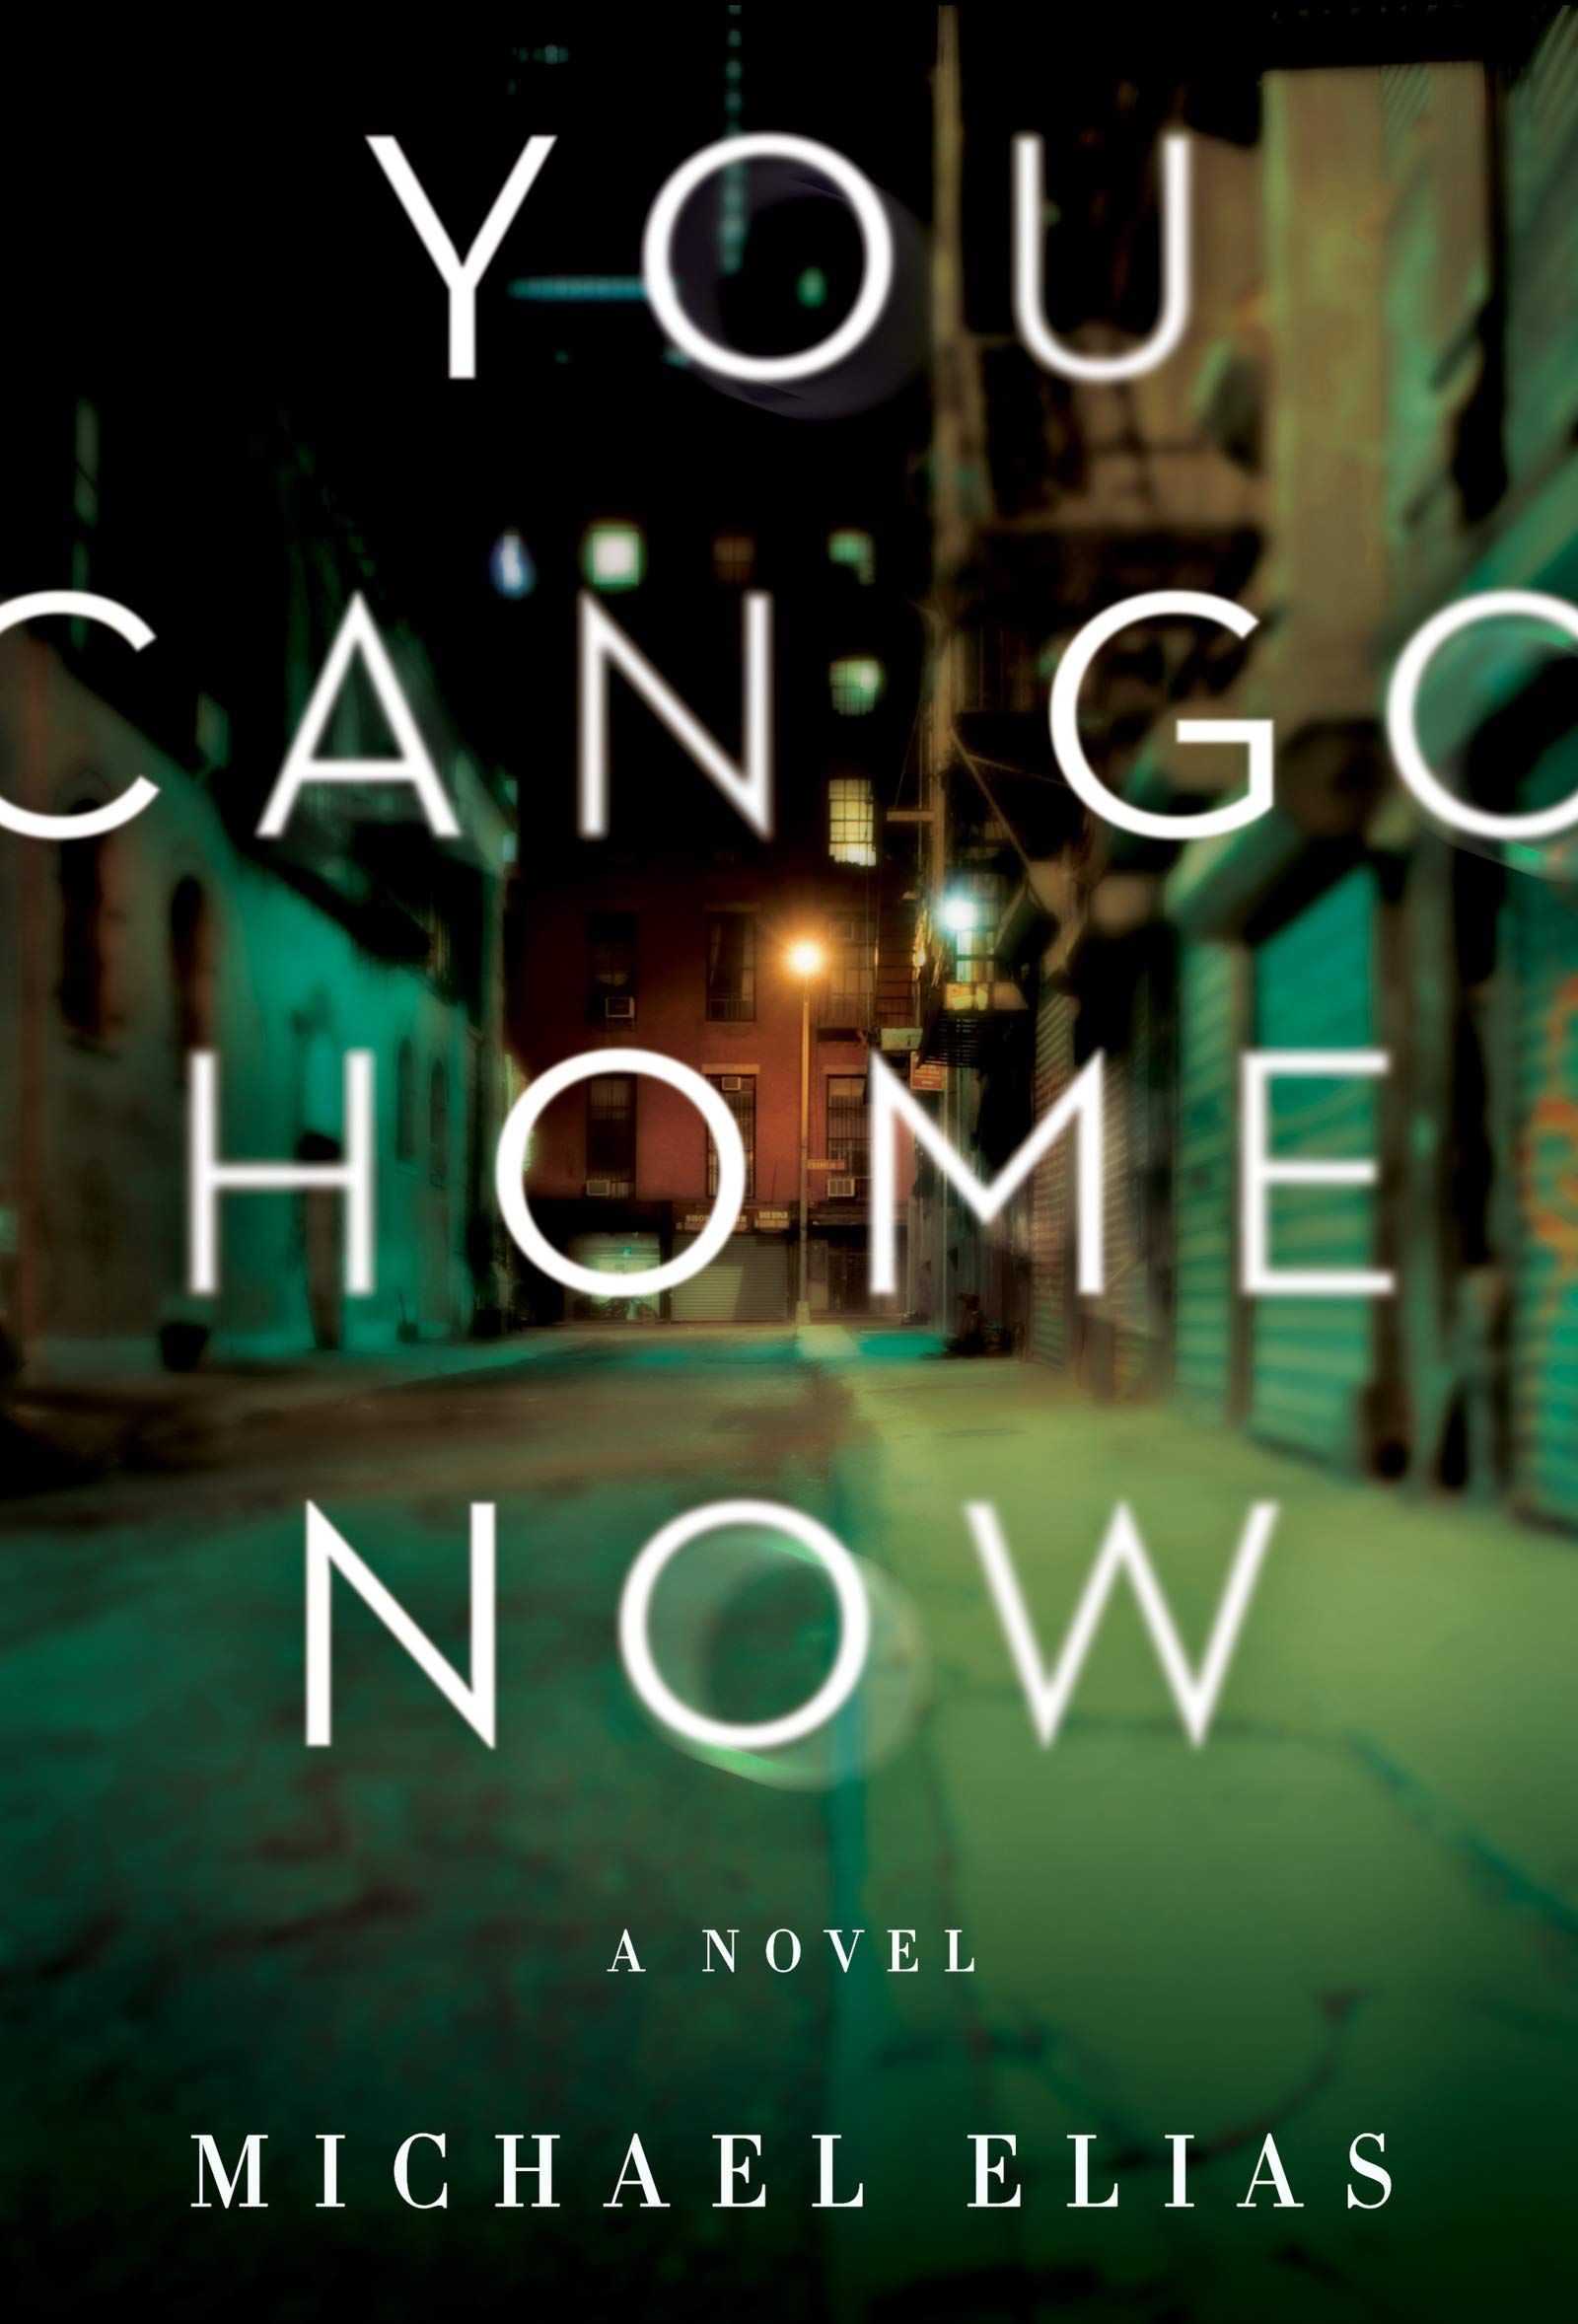 Scrupulously Woven: On Michael Elias’s “You Can Go Home Now”